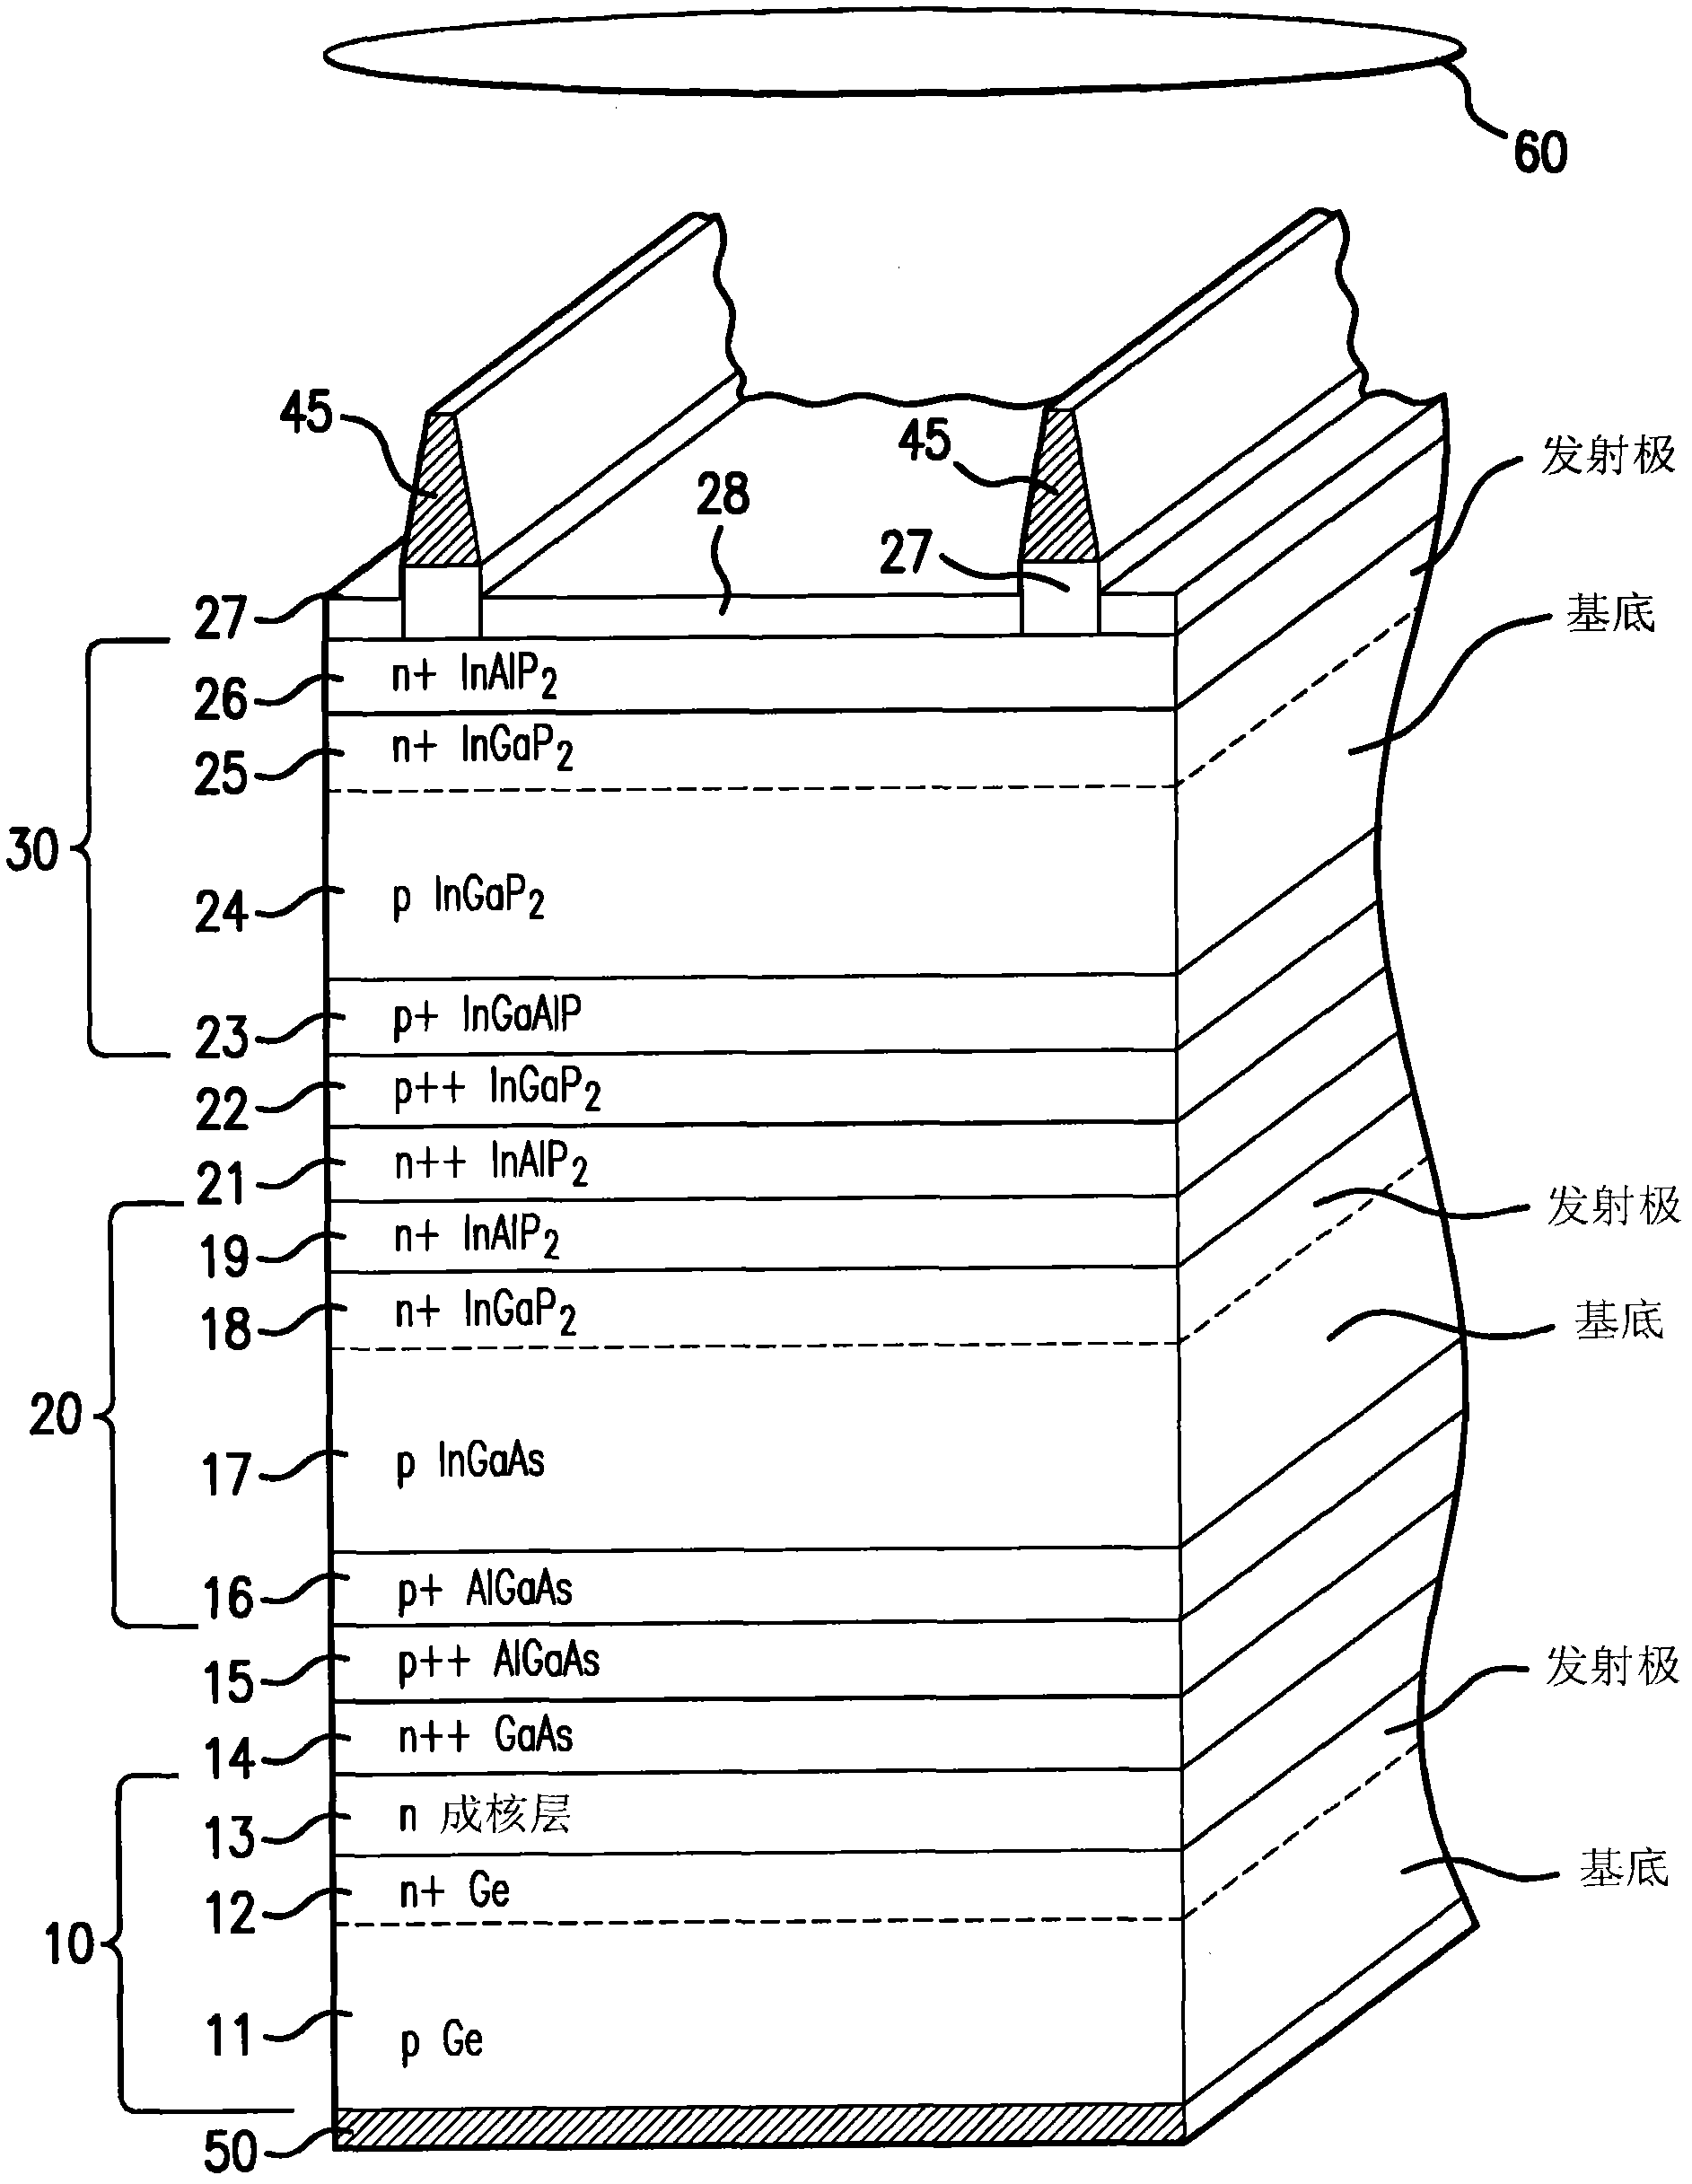 Grid design used for III-V compound semiconductor cell